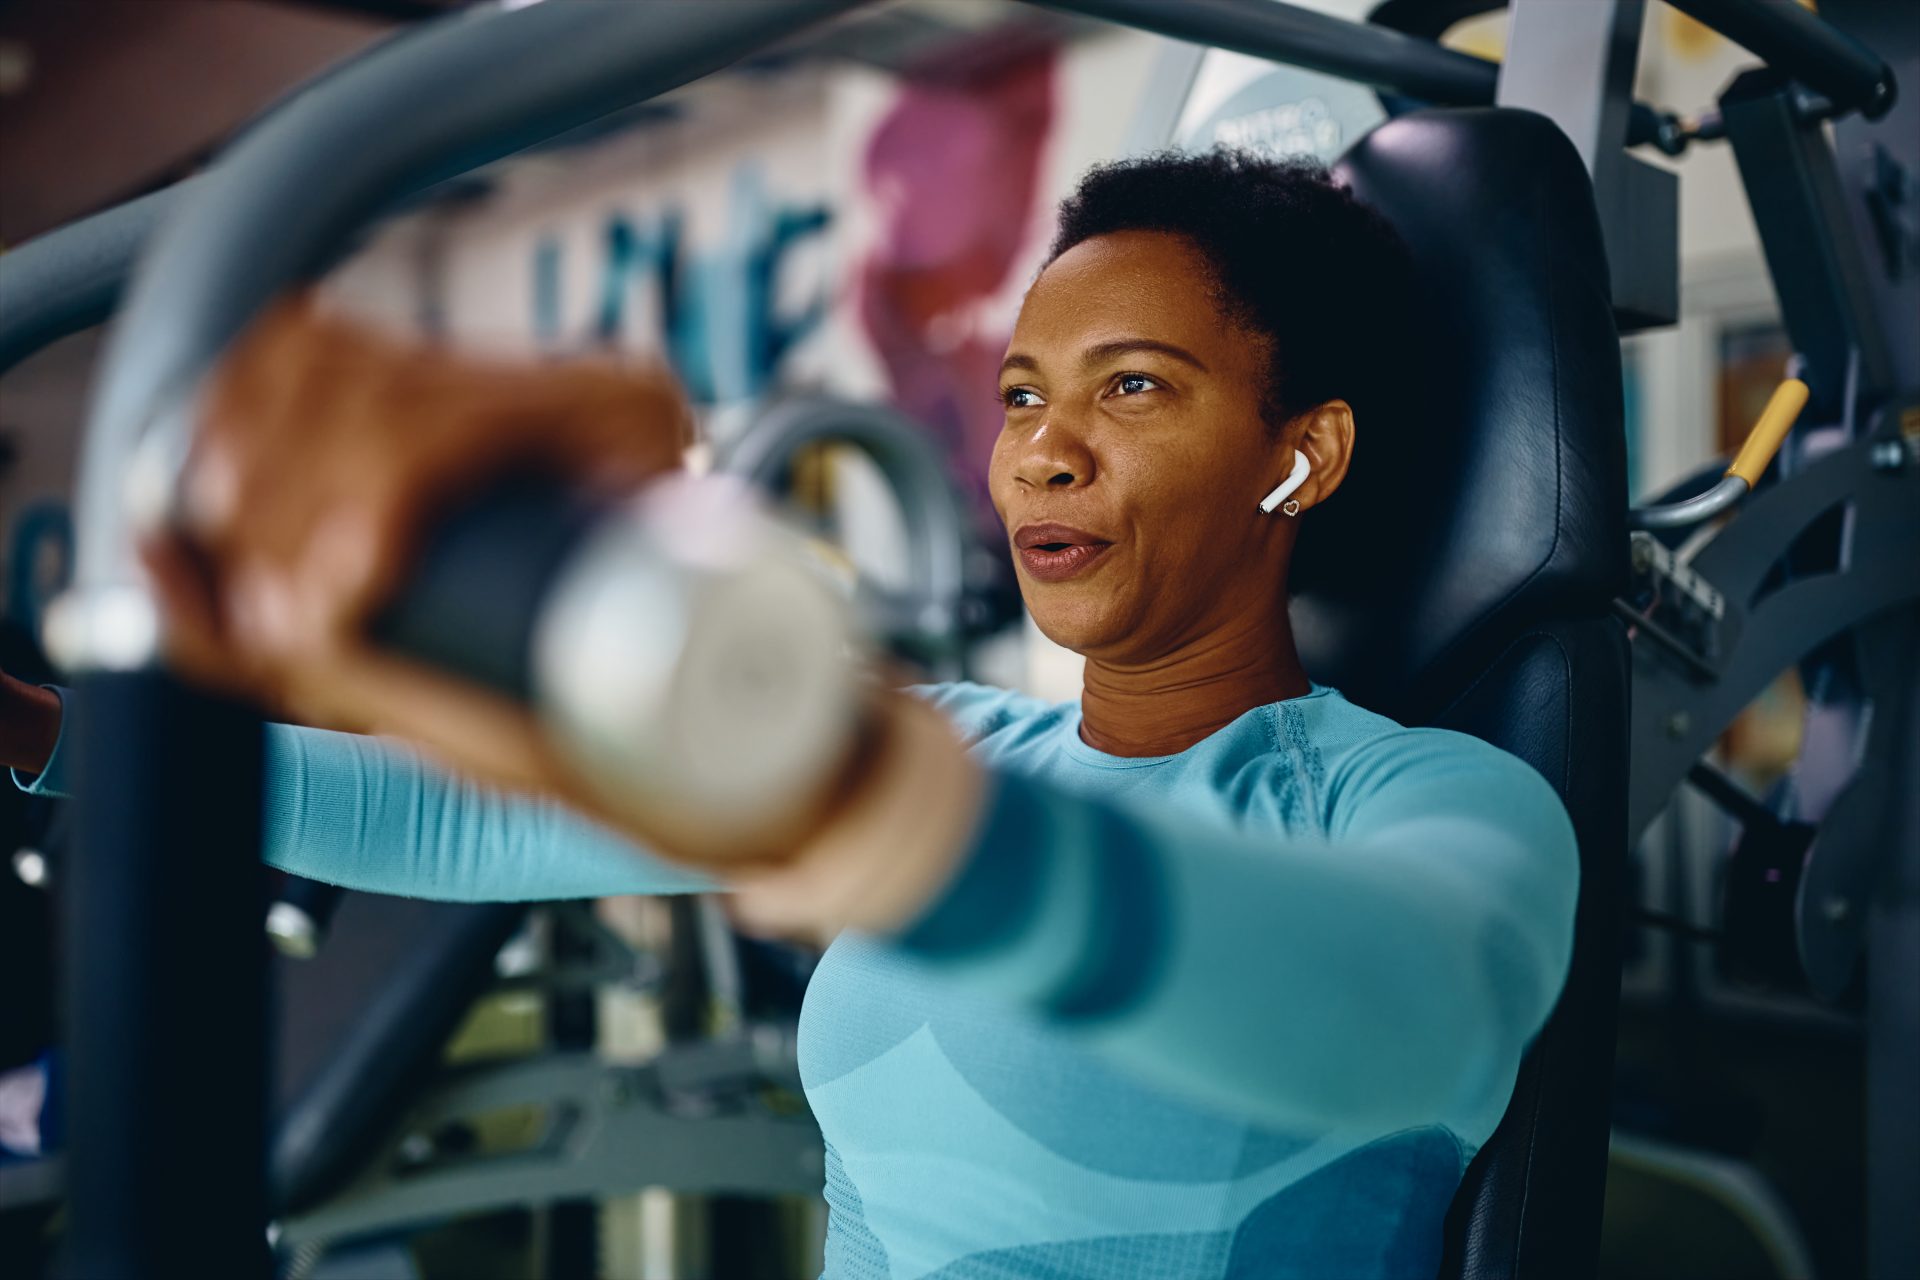 A Gender Gap at the Gym Is Keeping Women From Working Out